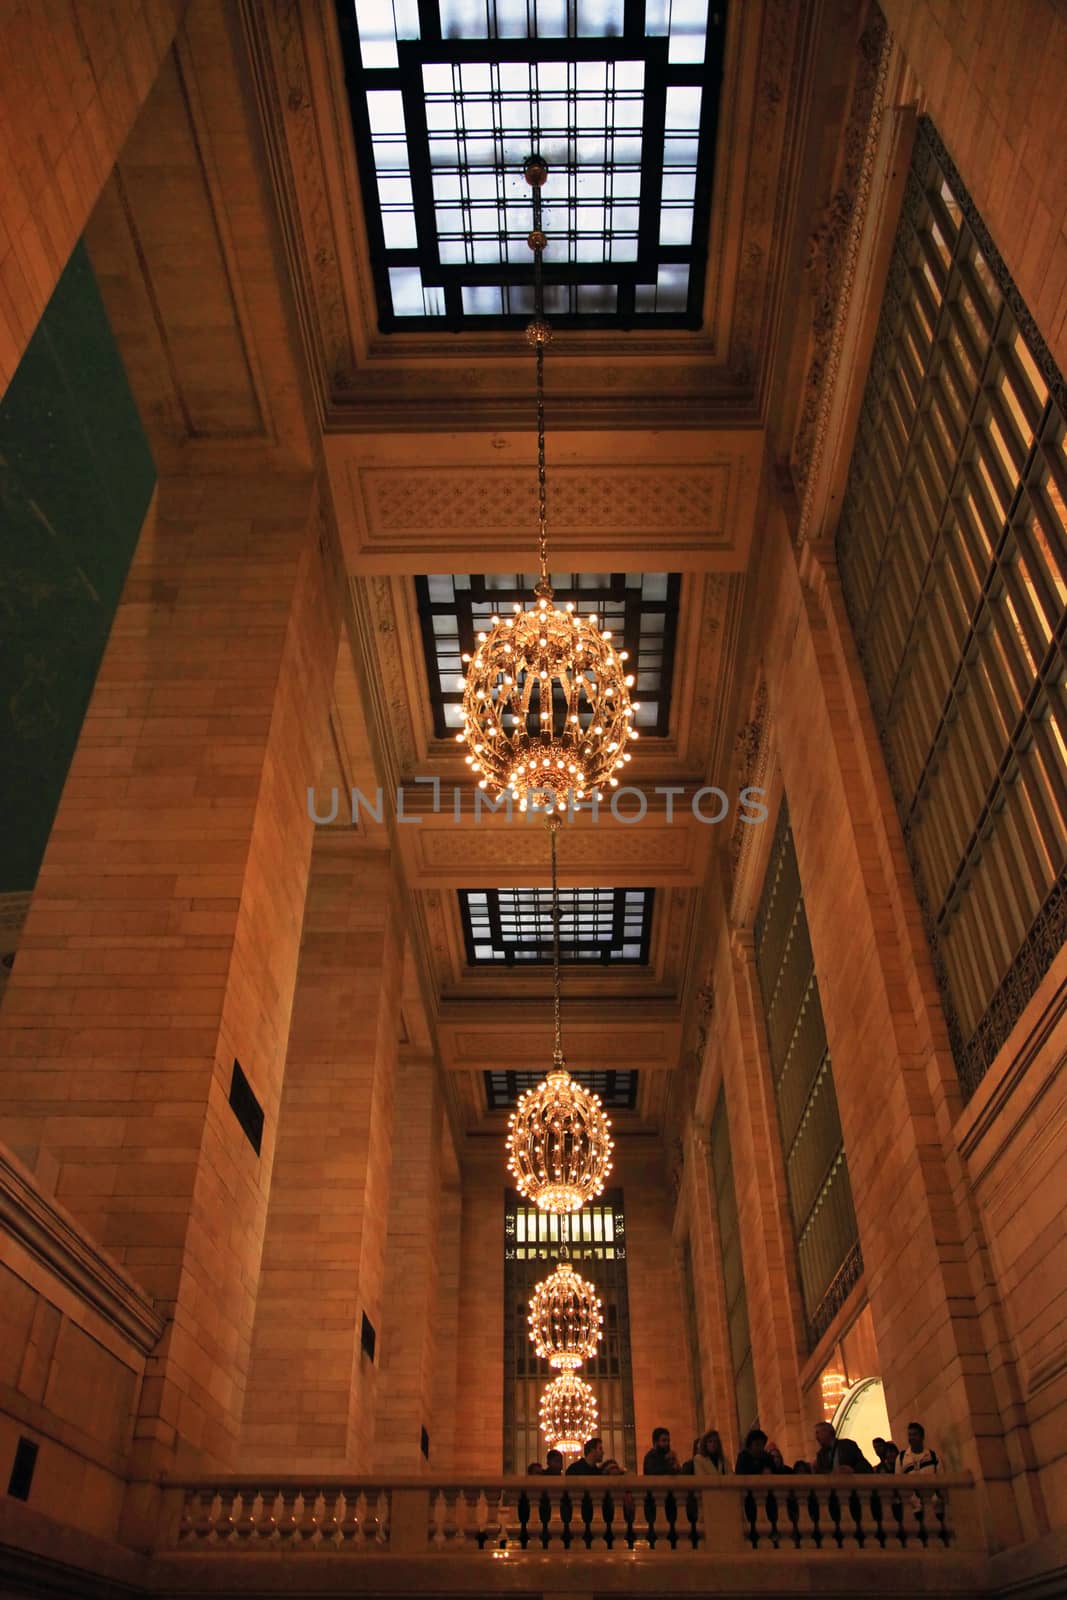 New York , USA - October, 12, 2012: Interior of Grand Central Station in New York. The terminal is the largest train station in the world by number of platforms having 44 in New York 12 October, 2012